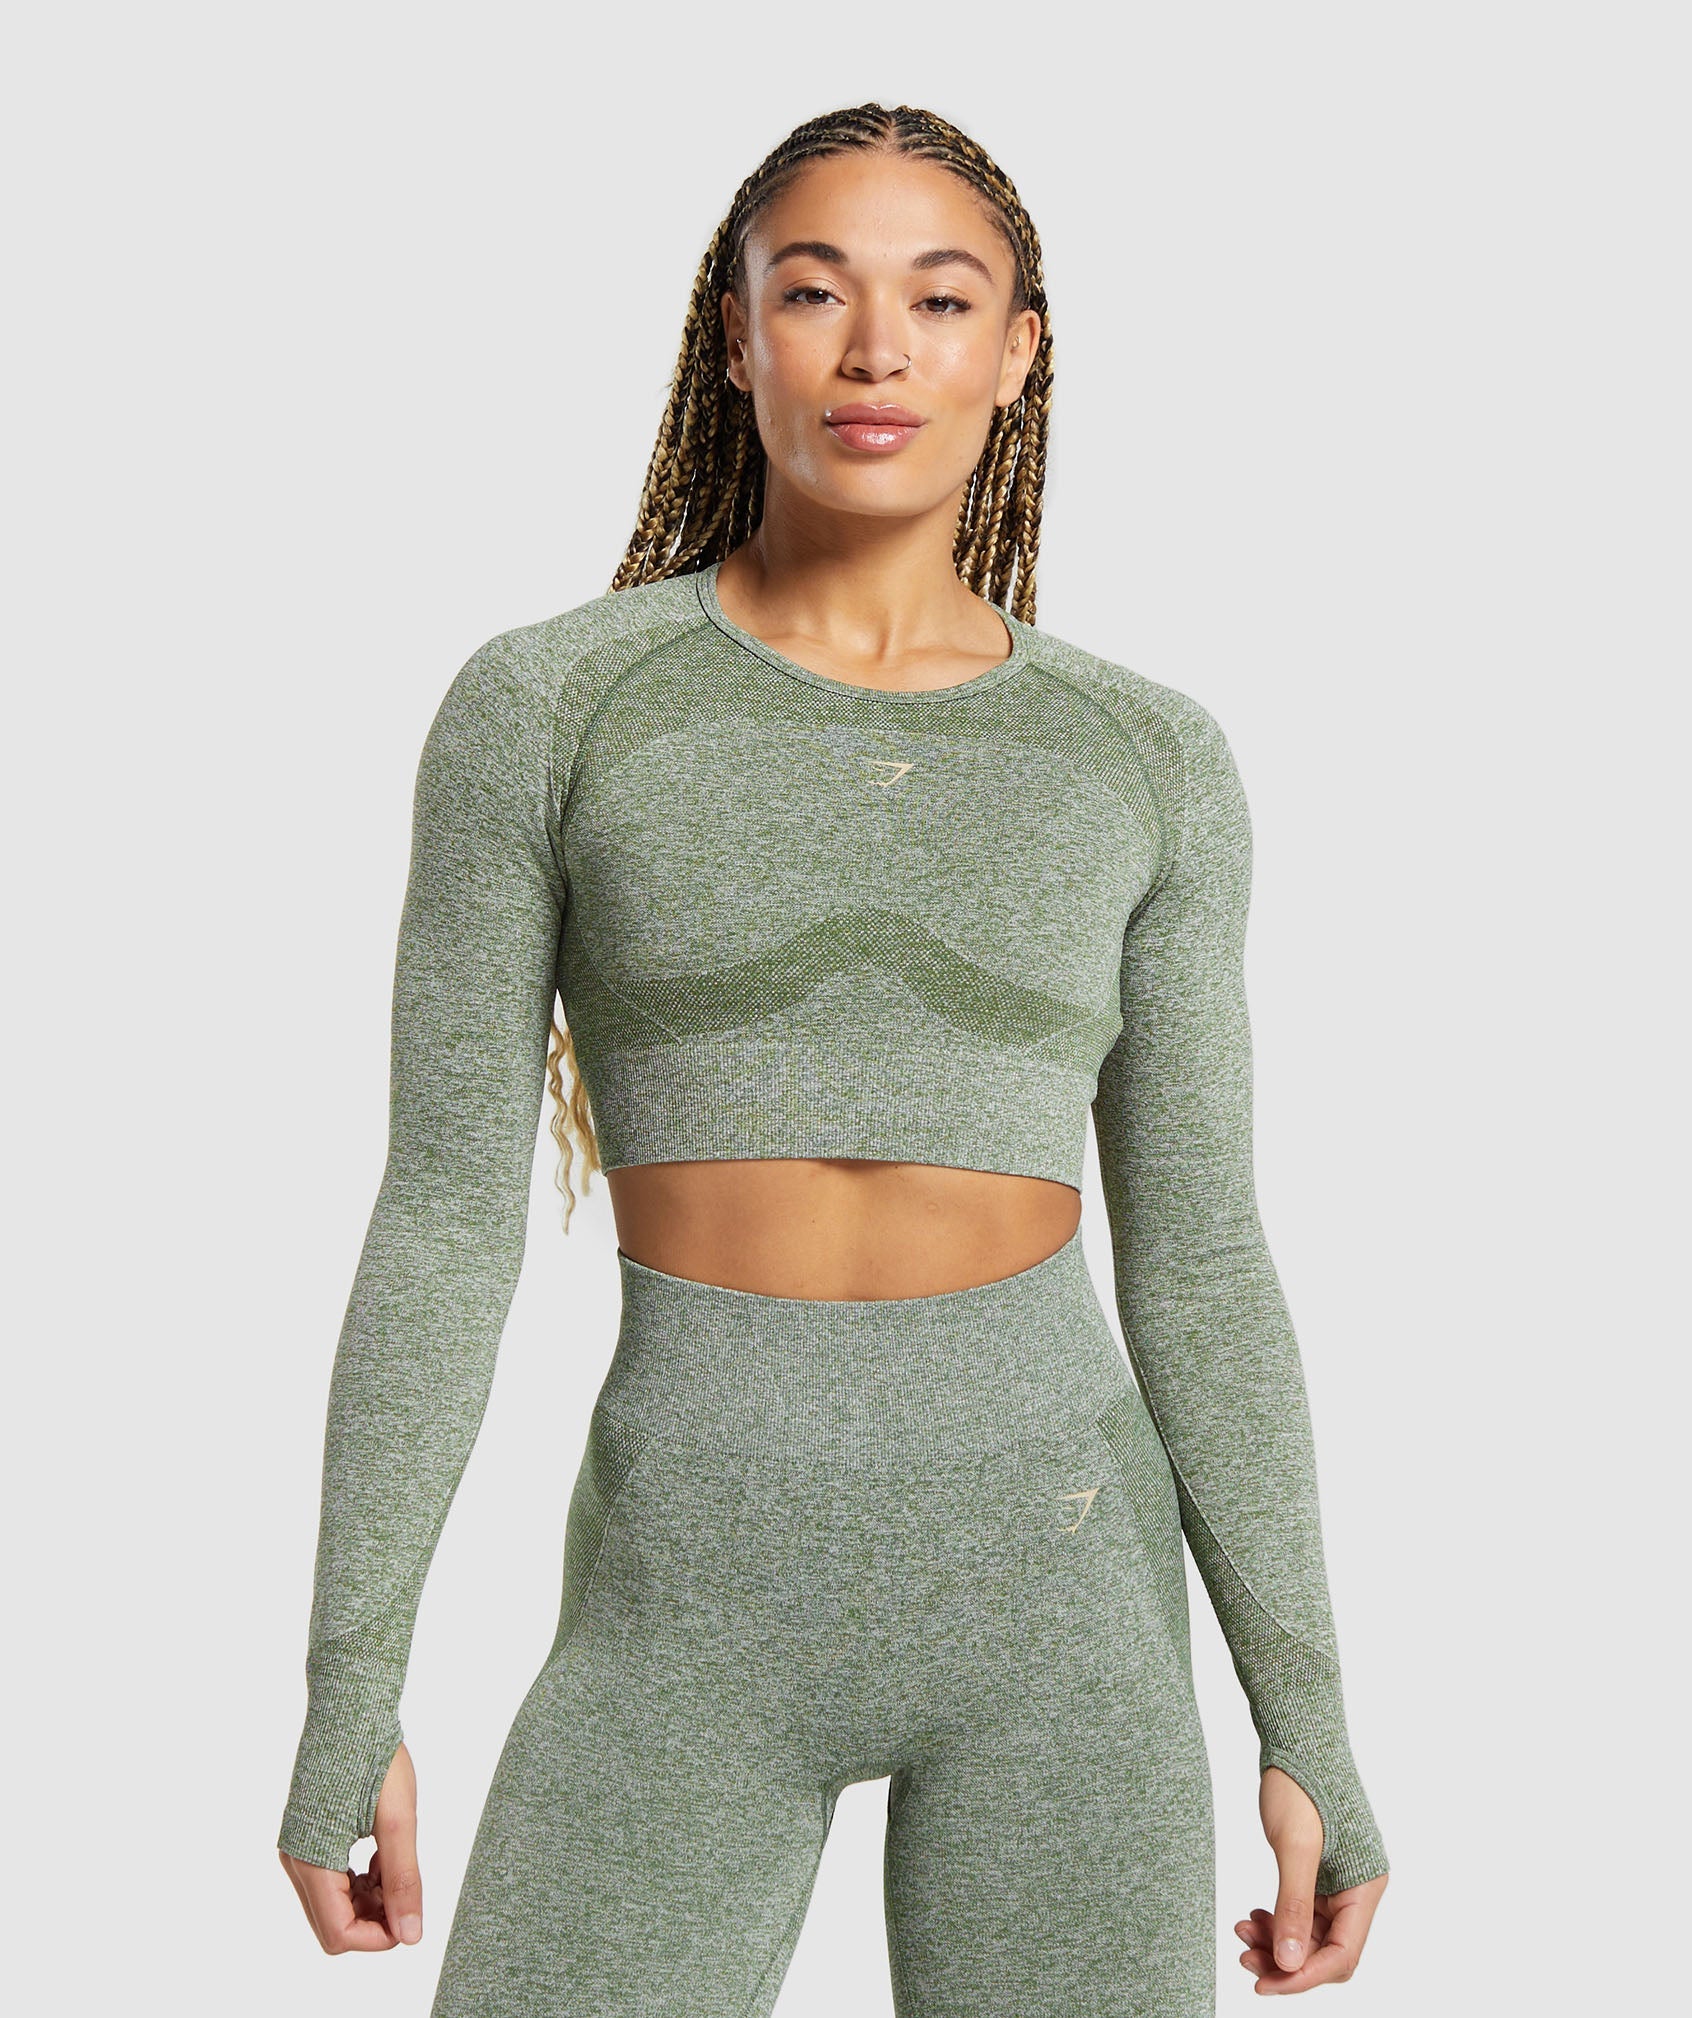 Flex Long Sleeve Crop Top in {{variantColor} is out of stock